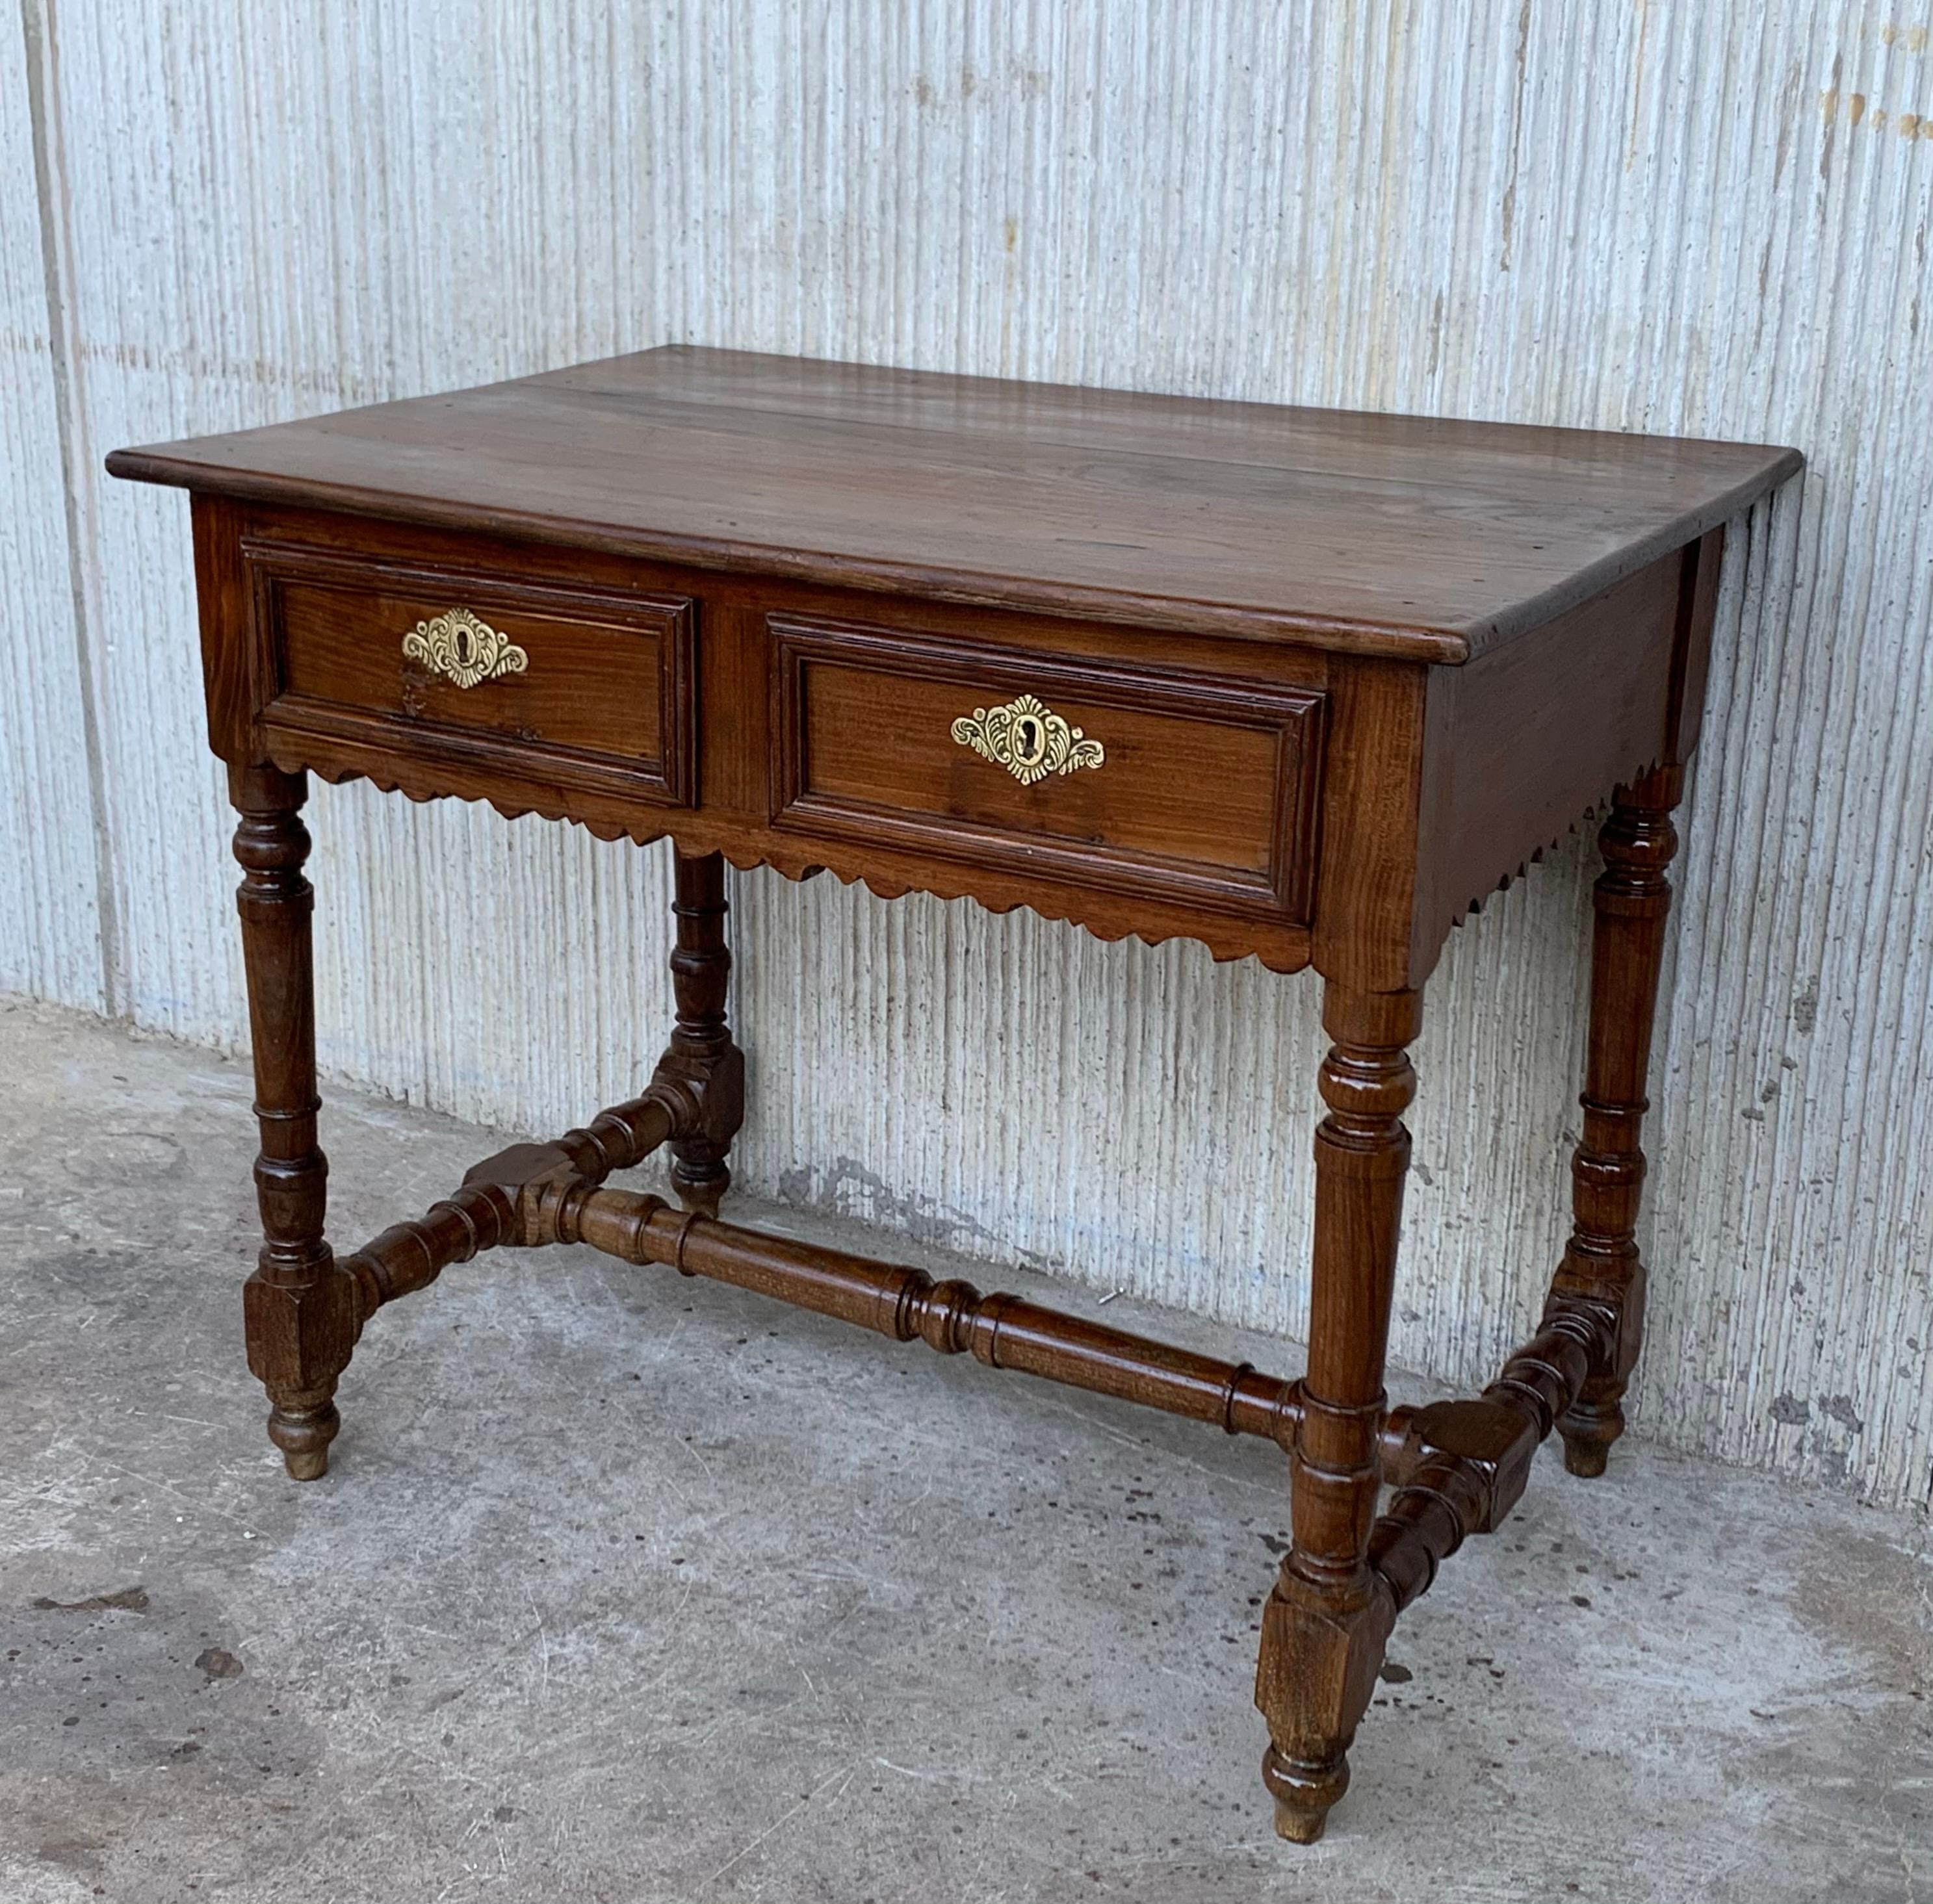 A charming early 20th century Spanish pine farm table with four tapered legs and a wonderfully well-worn finish from a century of use. Table works well for dining, but can also be used as a desk or butcher block

Height from the floor to the